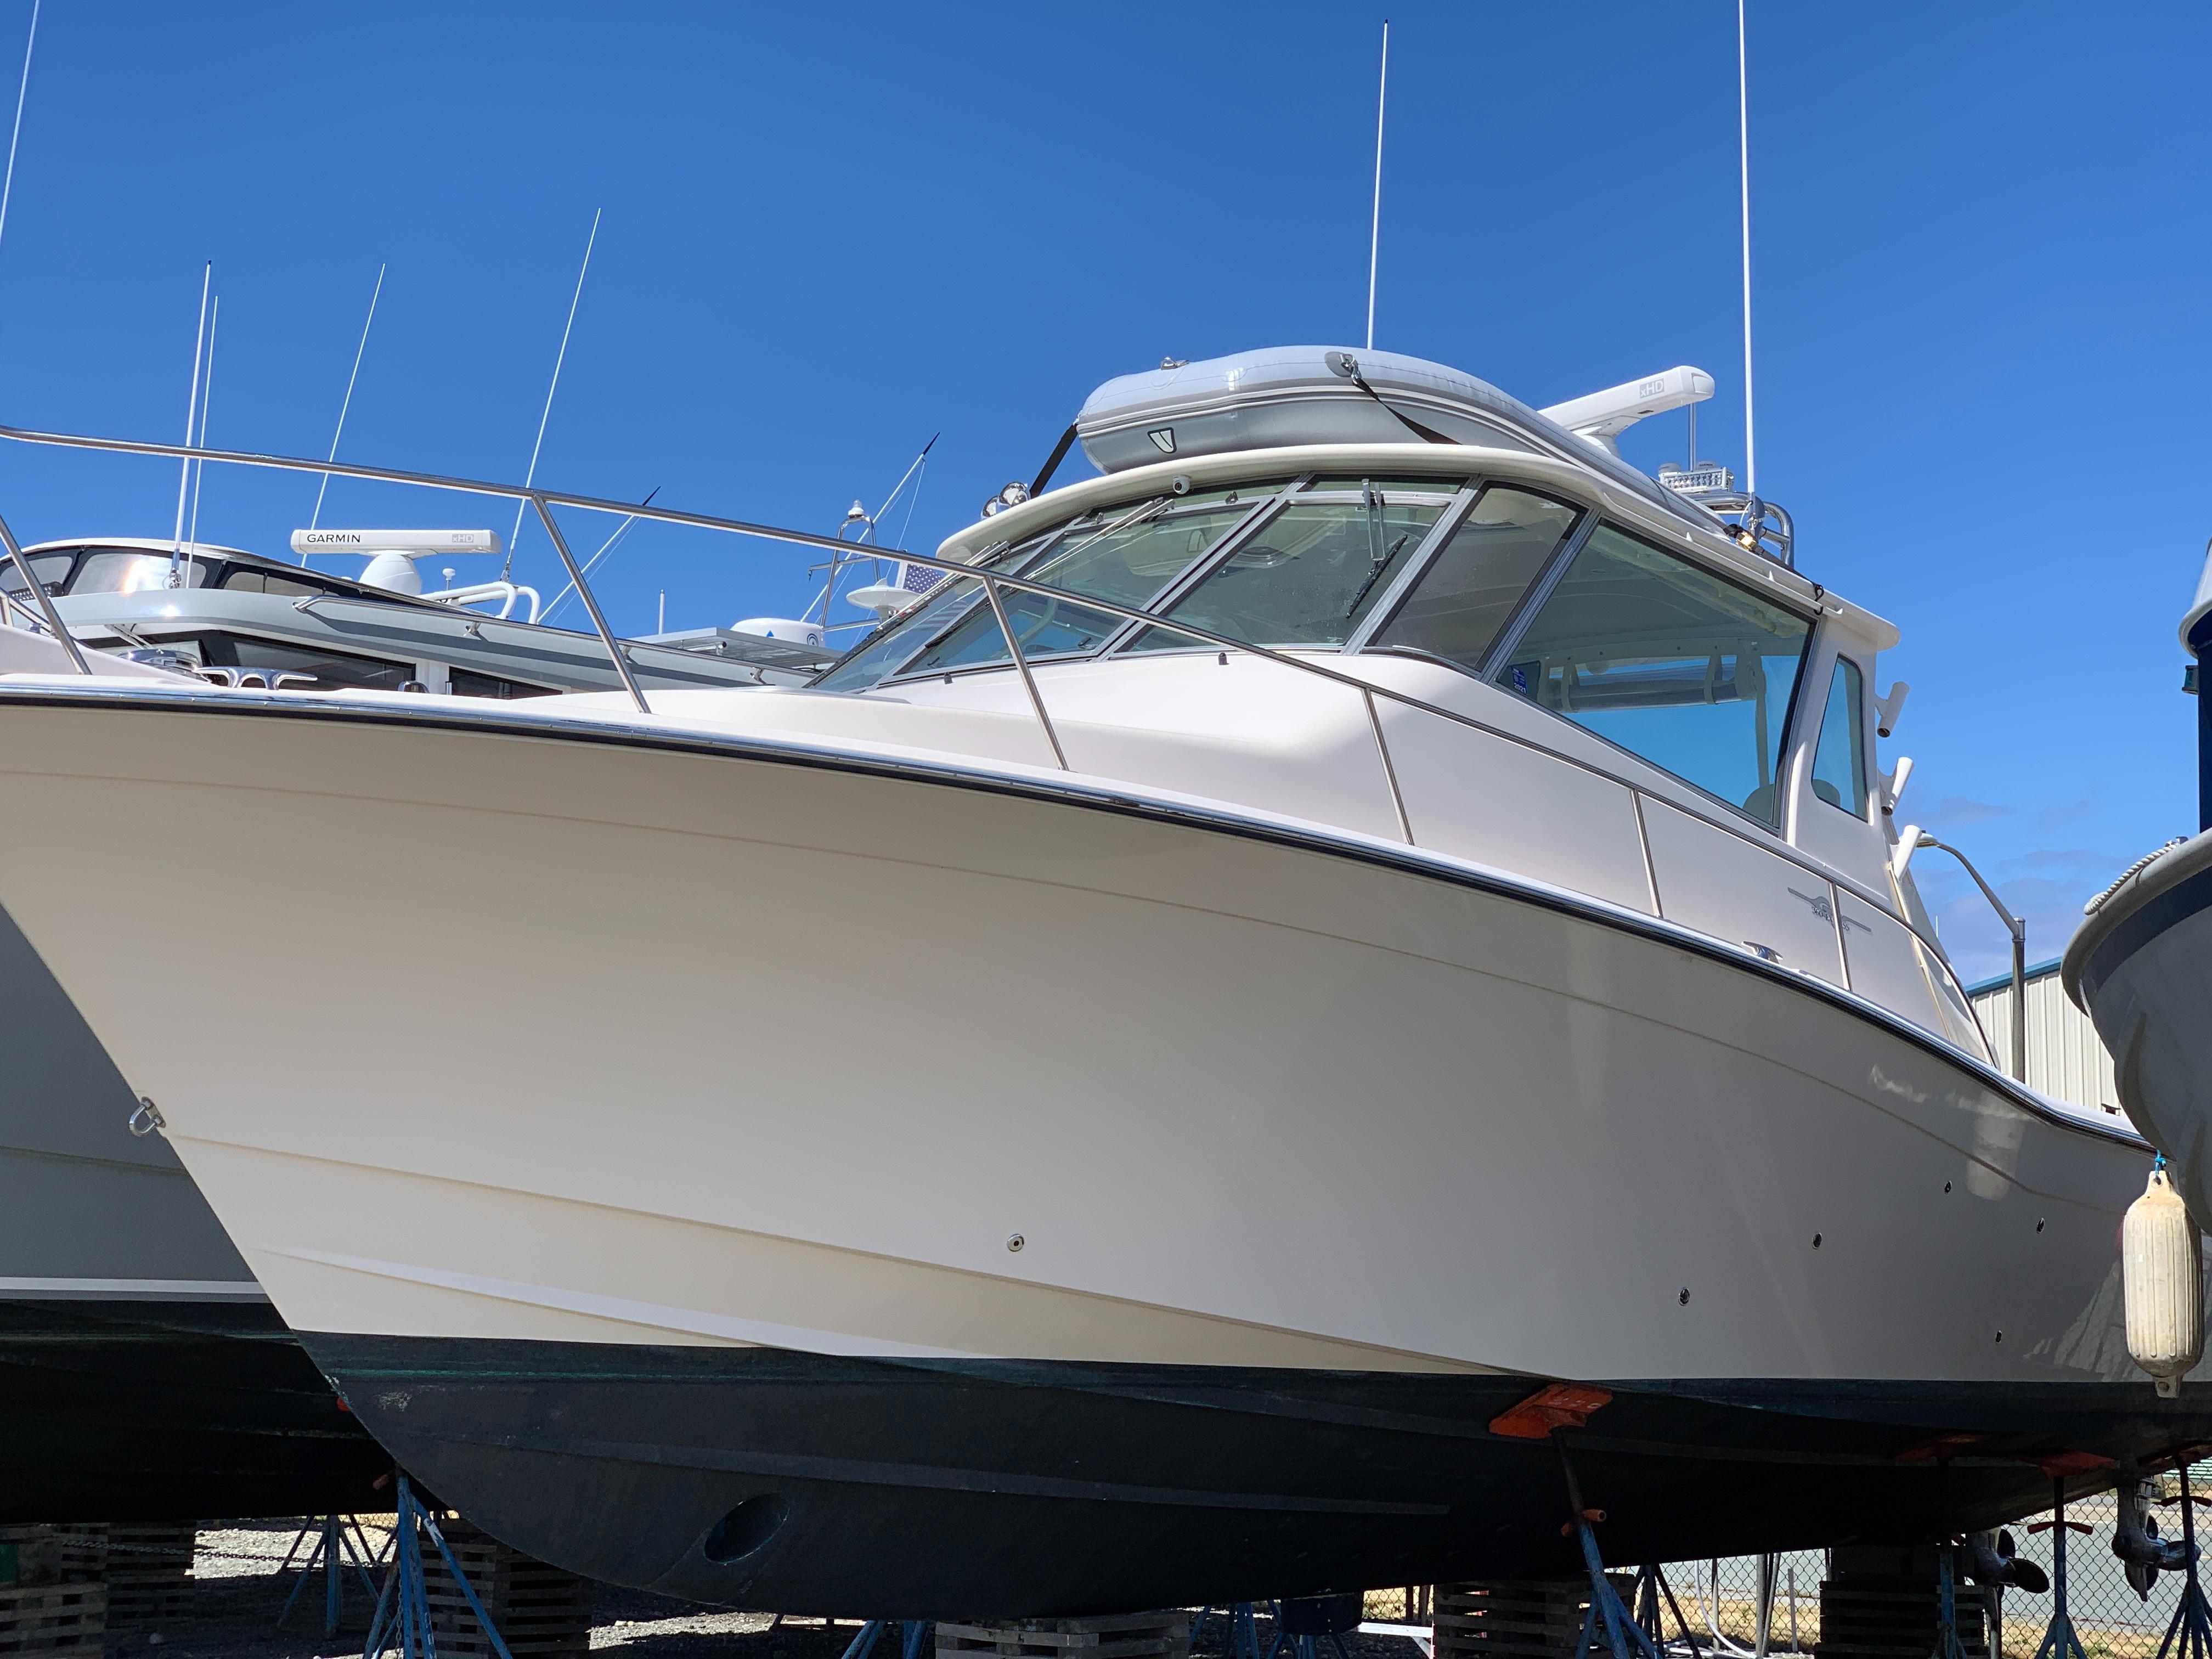 yachts for sale in anacortes